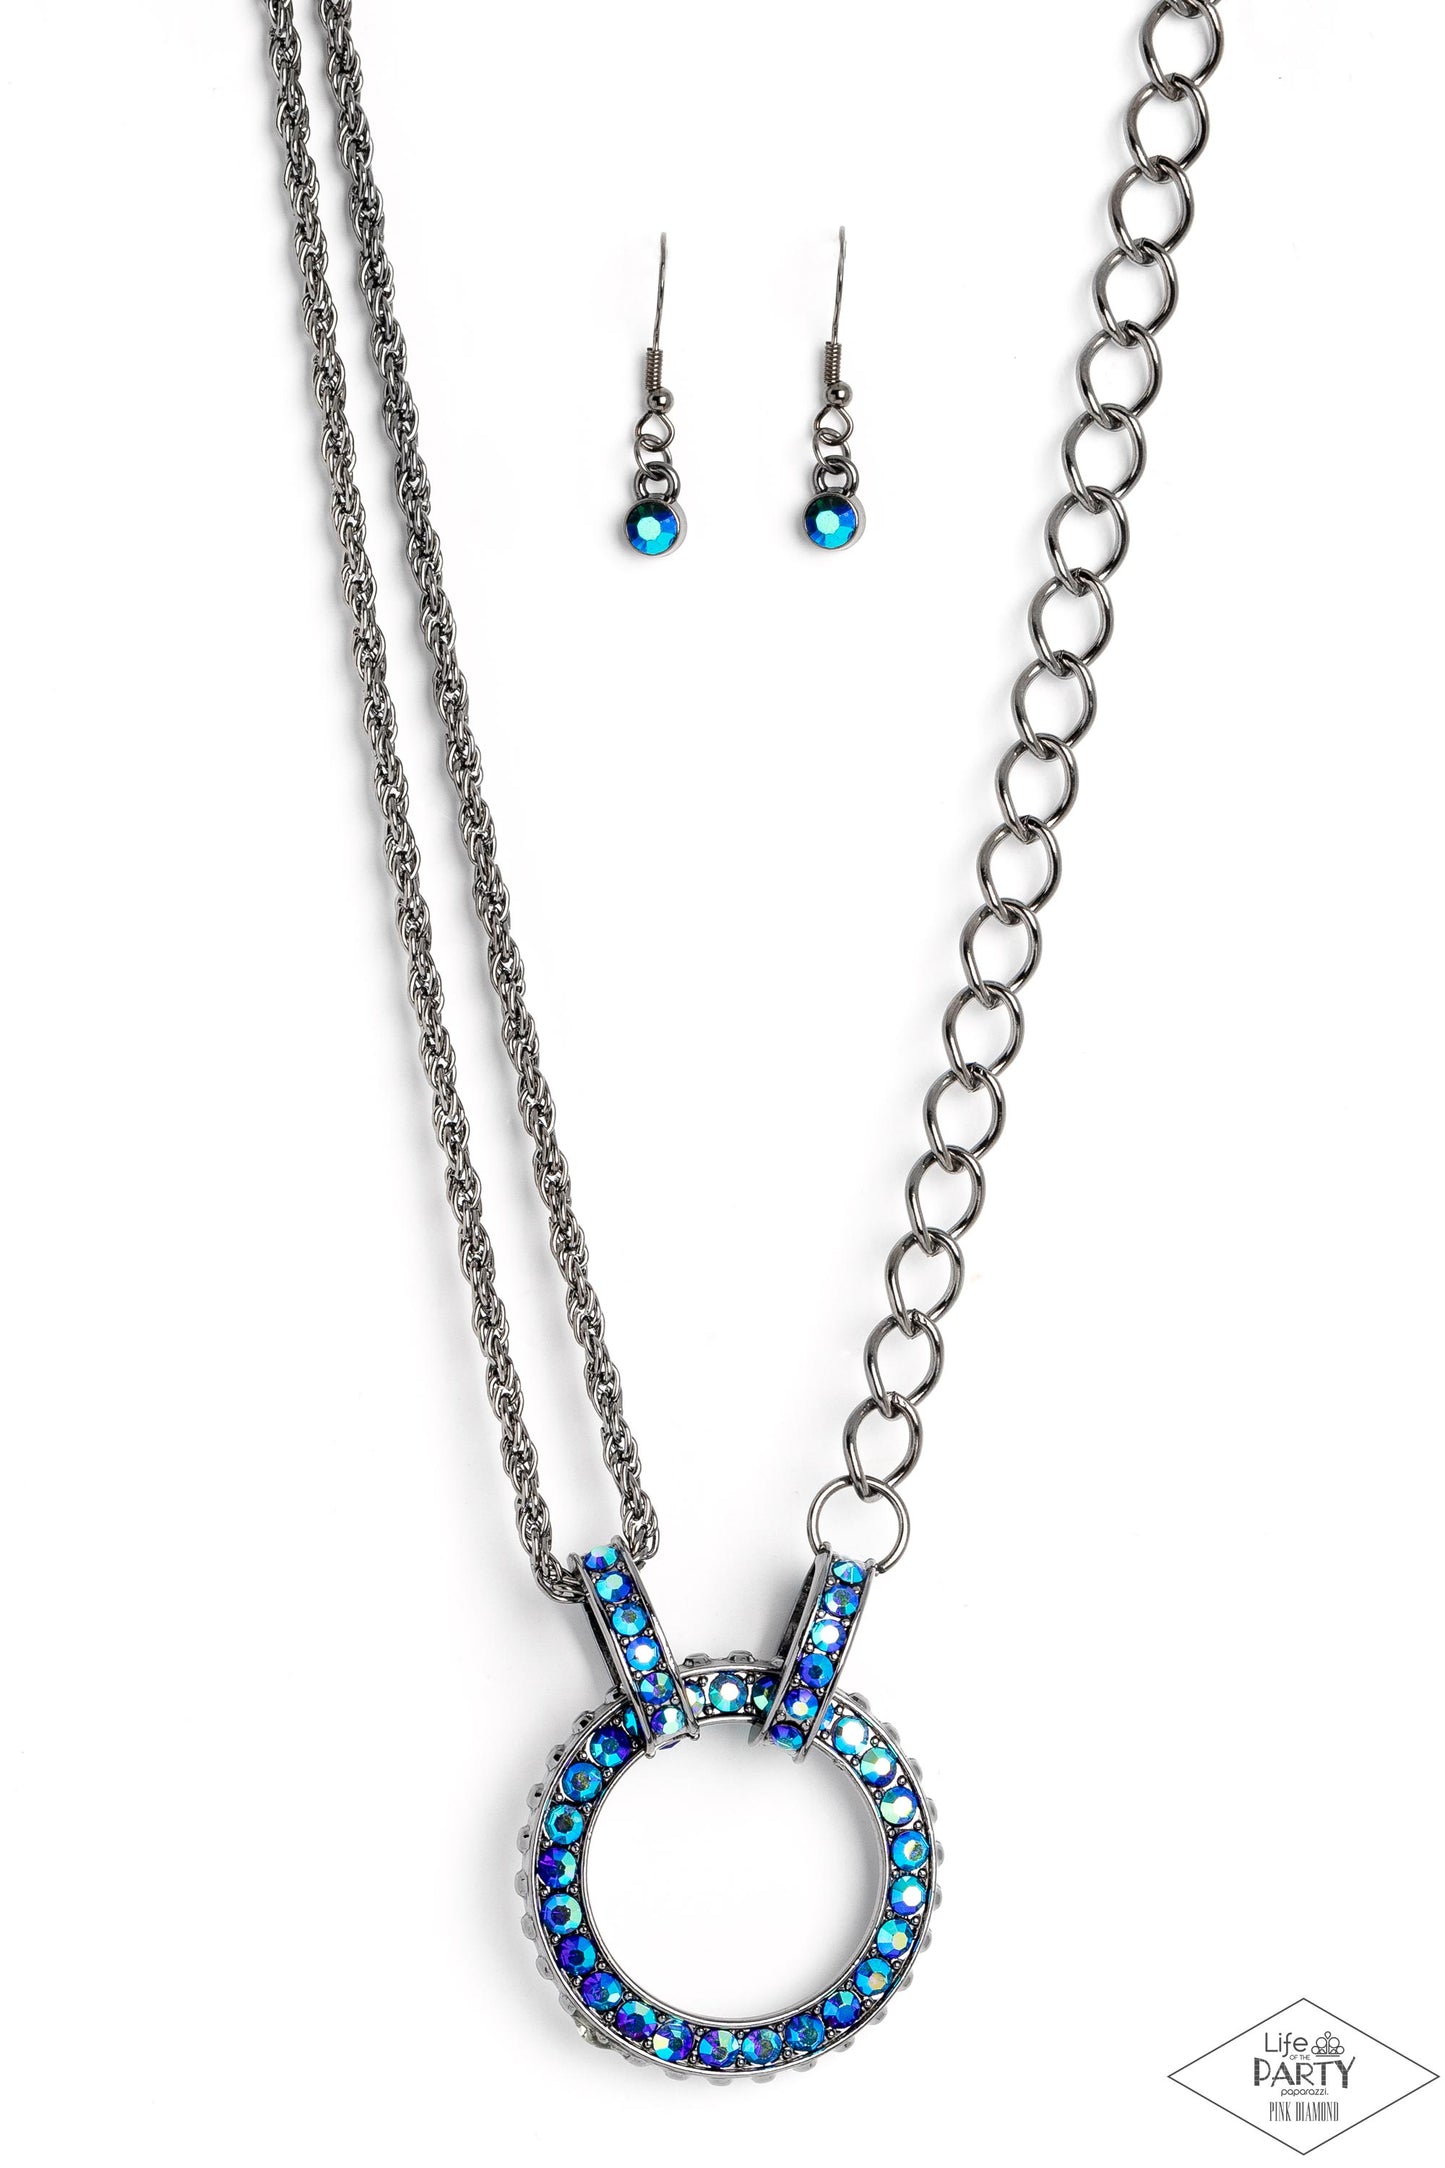 Razzle Dazzle Blue Necklace - Paparazzi Accessories  A collision of mismatched gunmetal chains gives way to a studded gunmetal pendant that has been encrusted in glittery blue UV rhinestones. The result is a gritty, industrial design with endless attitude. Features an adjustable clasp closure.  Sold as one individual necklace. Includes one pair of matching earrings.  P2ED-BLXX-046XX